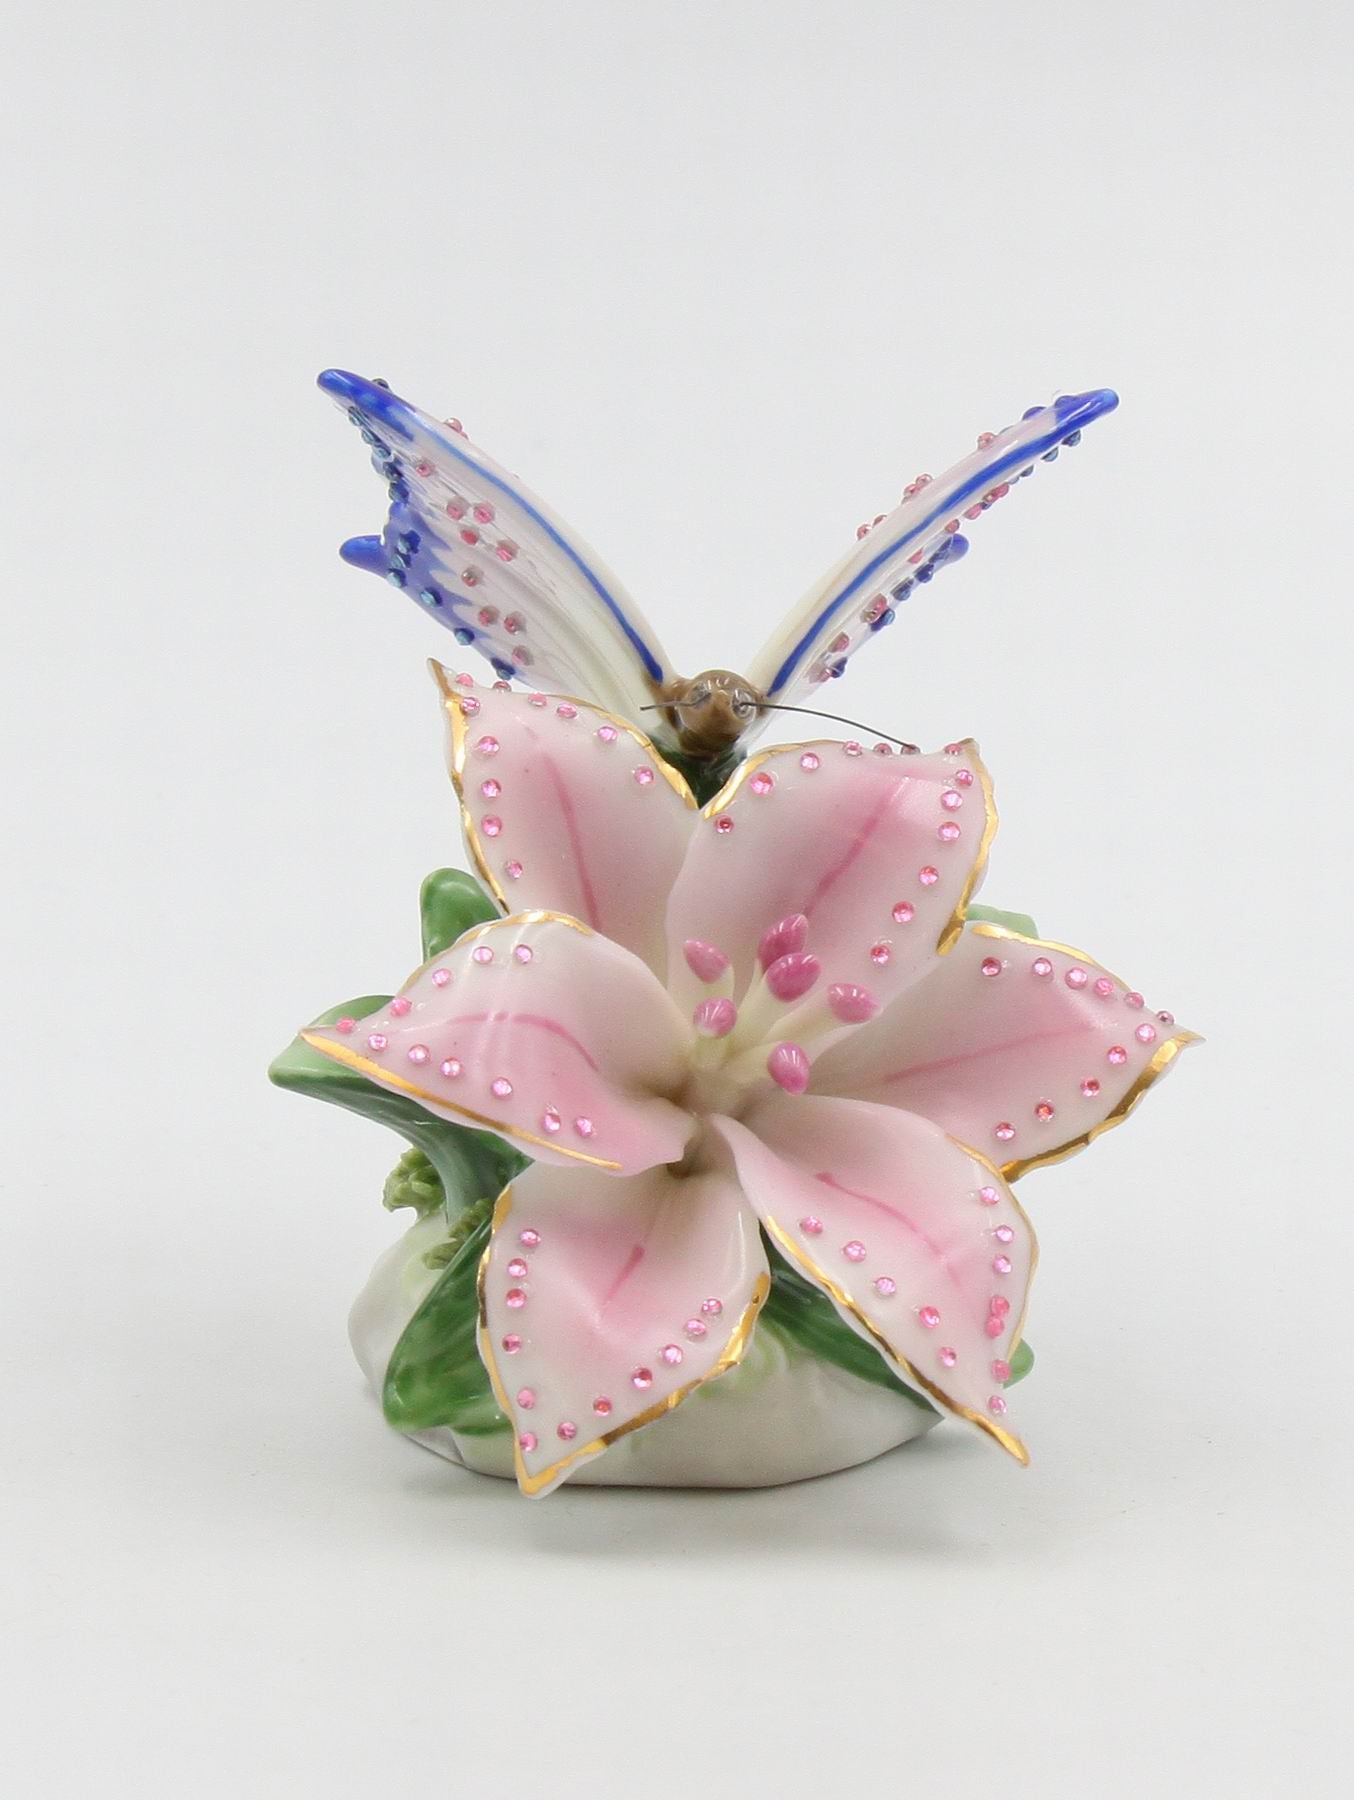 Ceramic Glittering Butterfly and Lily Flower in Bloom Figurine, Home Décor, Gift for Her, Gift for Mom, Nature Lover Décor, Cottagecore